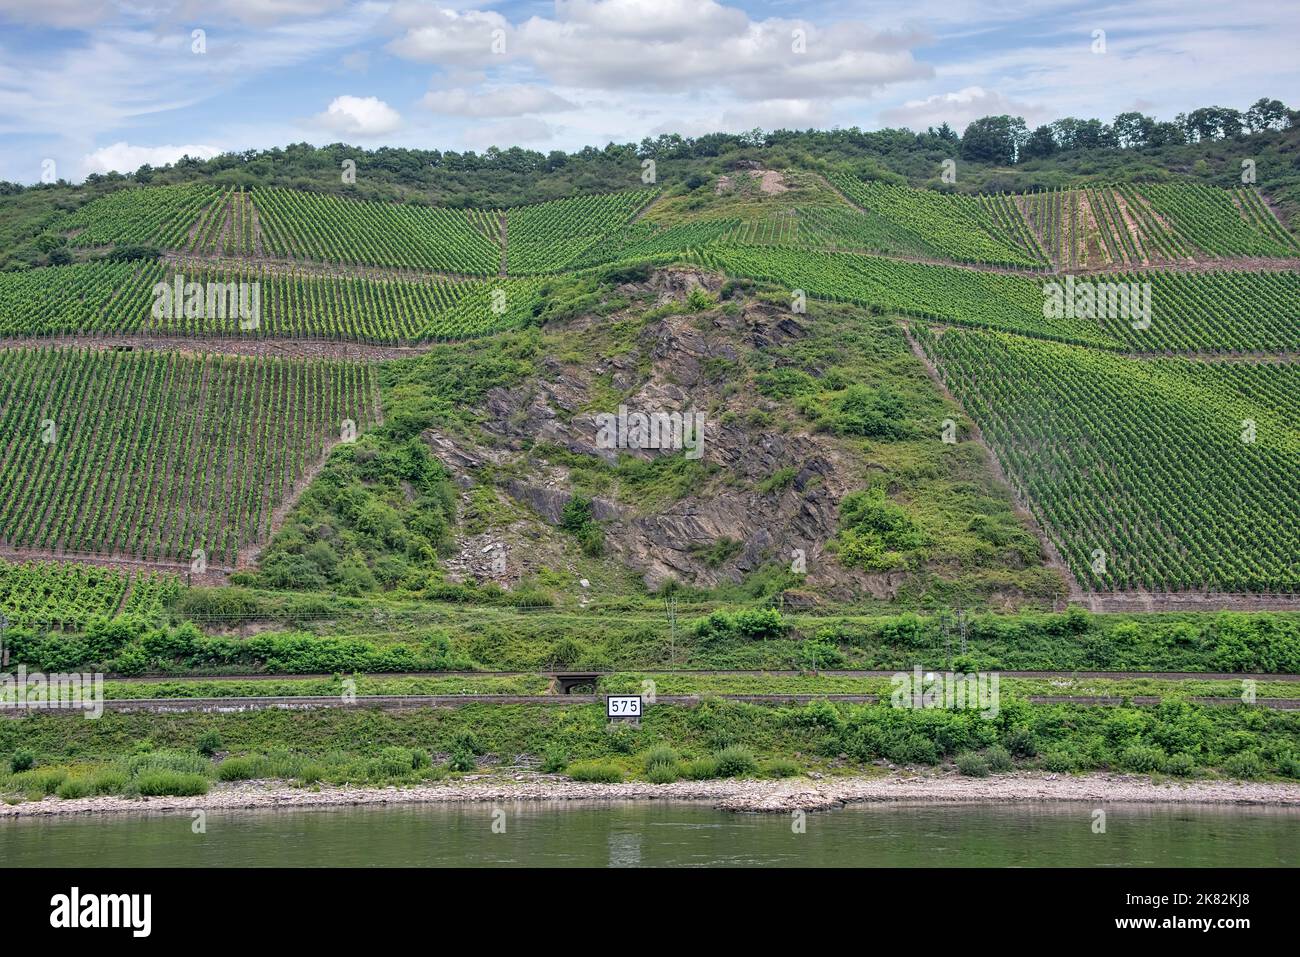 Several large wine vineyards are located along the Rhine River,  spanning from Germany to France. Stock Photo